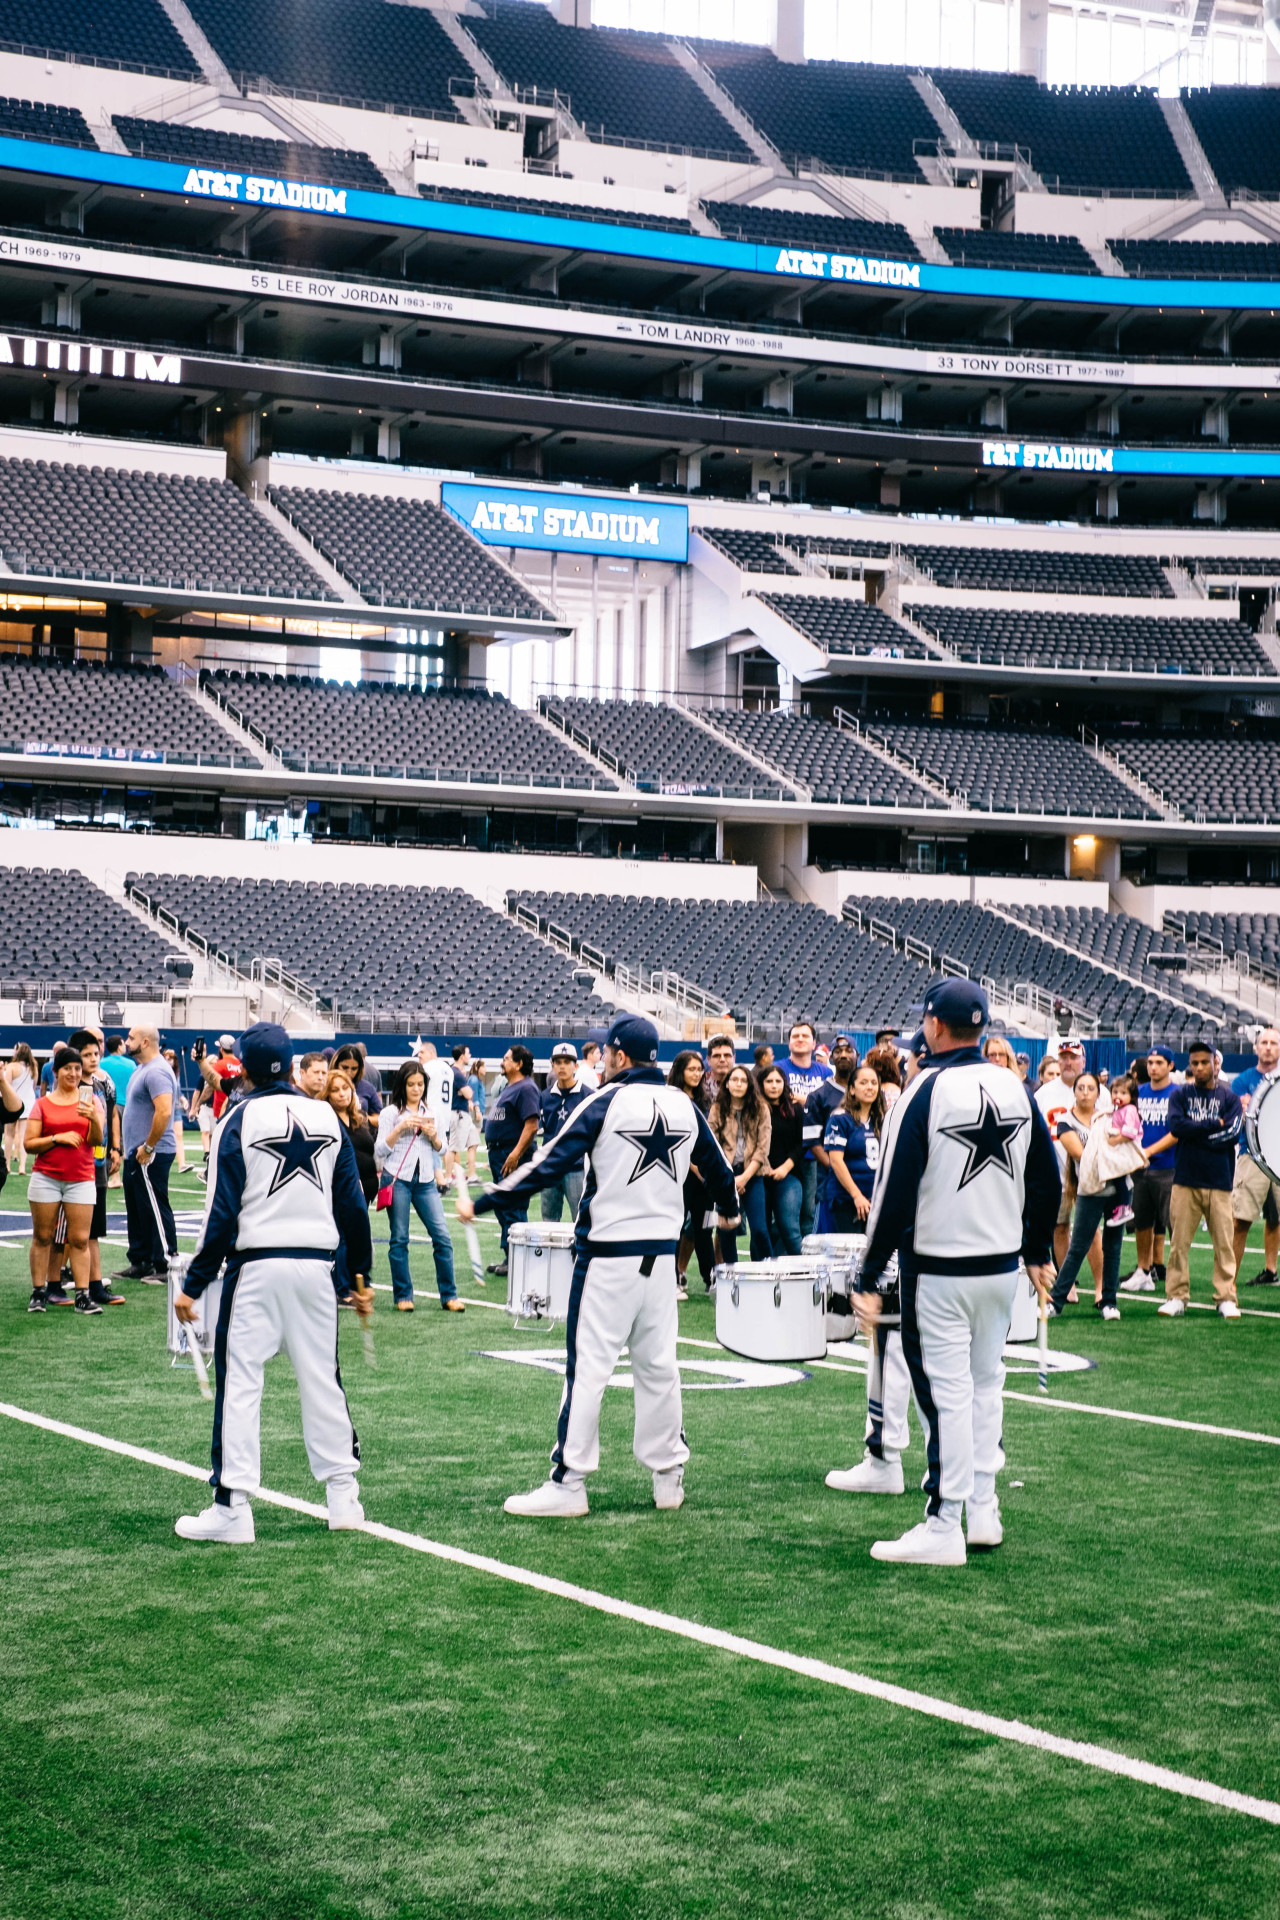 Dallas Cowboys’ Rally Days at AT&T StadiumPhotography by Korey Klein